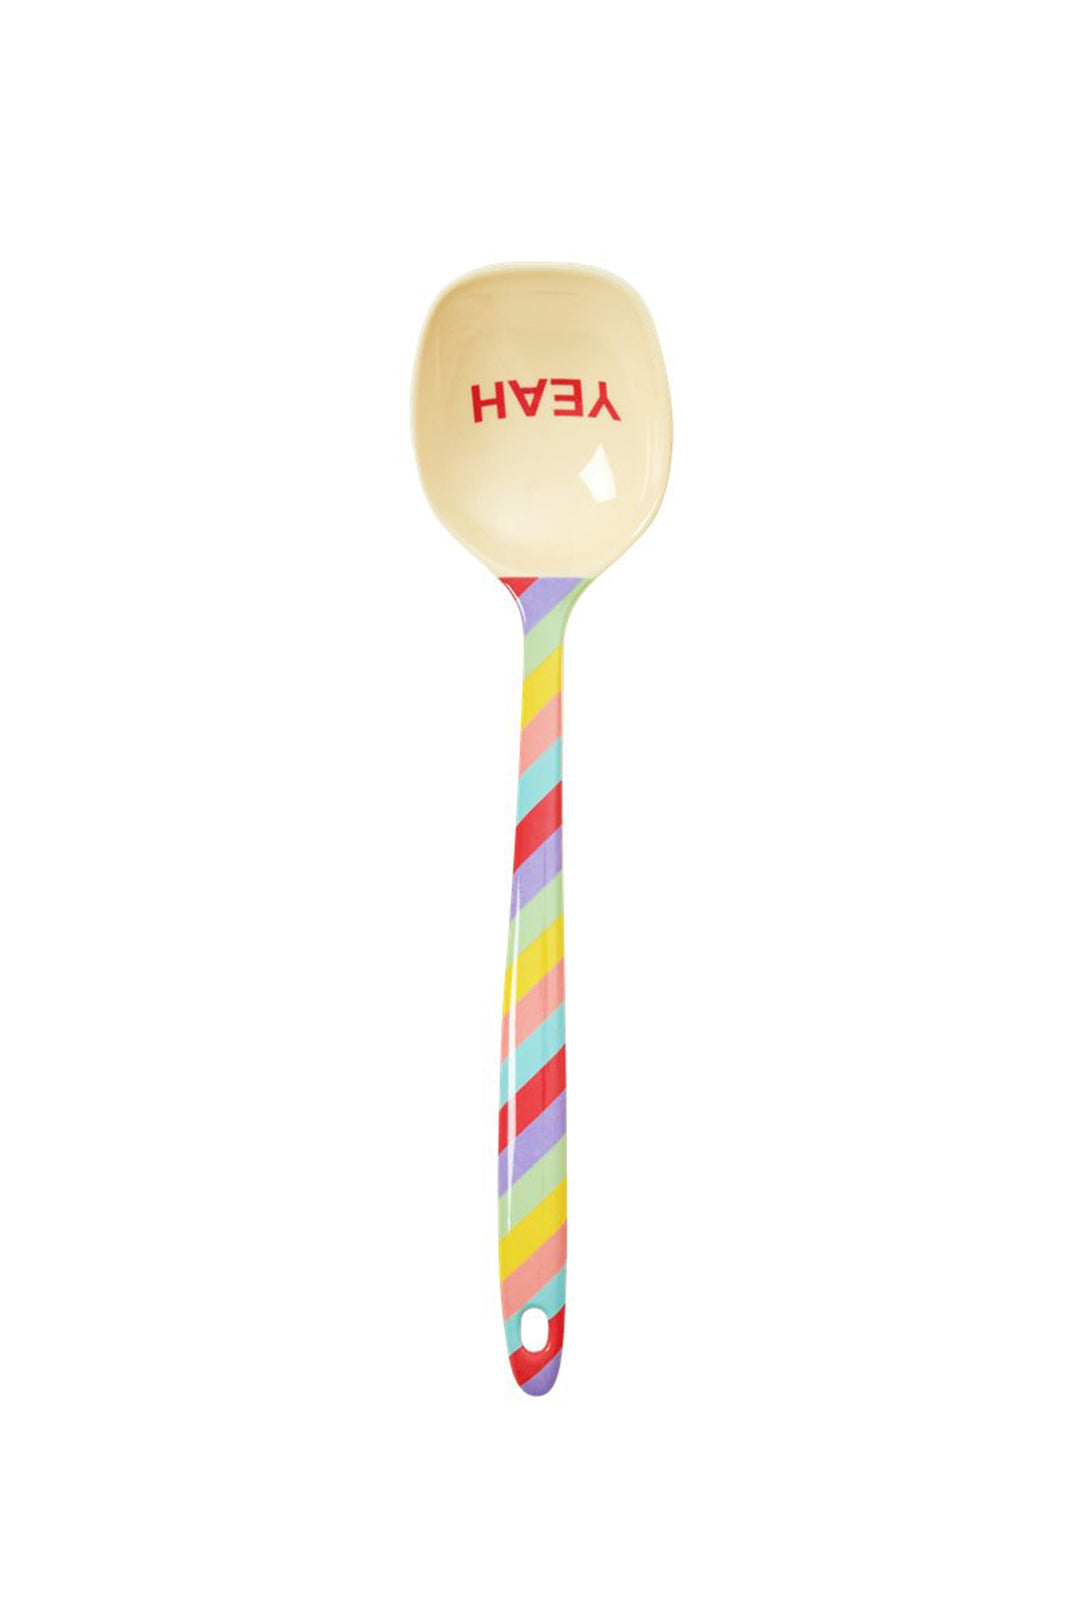 Yippie Yippie Yeah Melamine Cooking Spoon